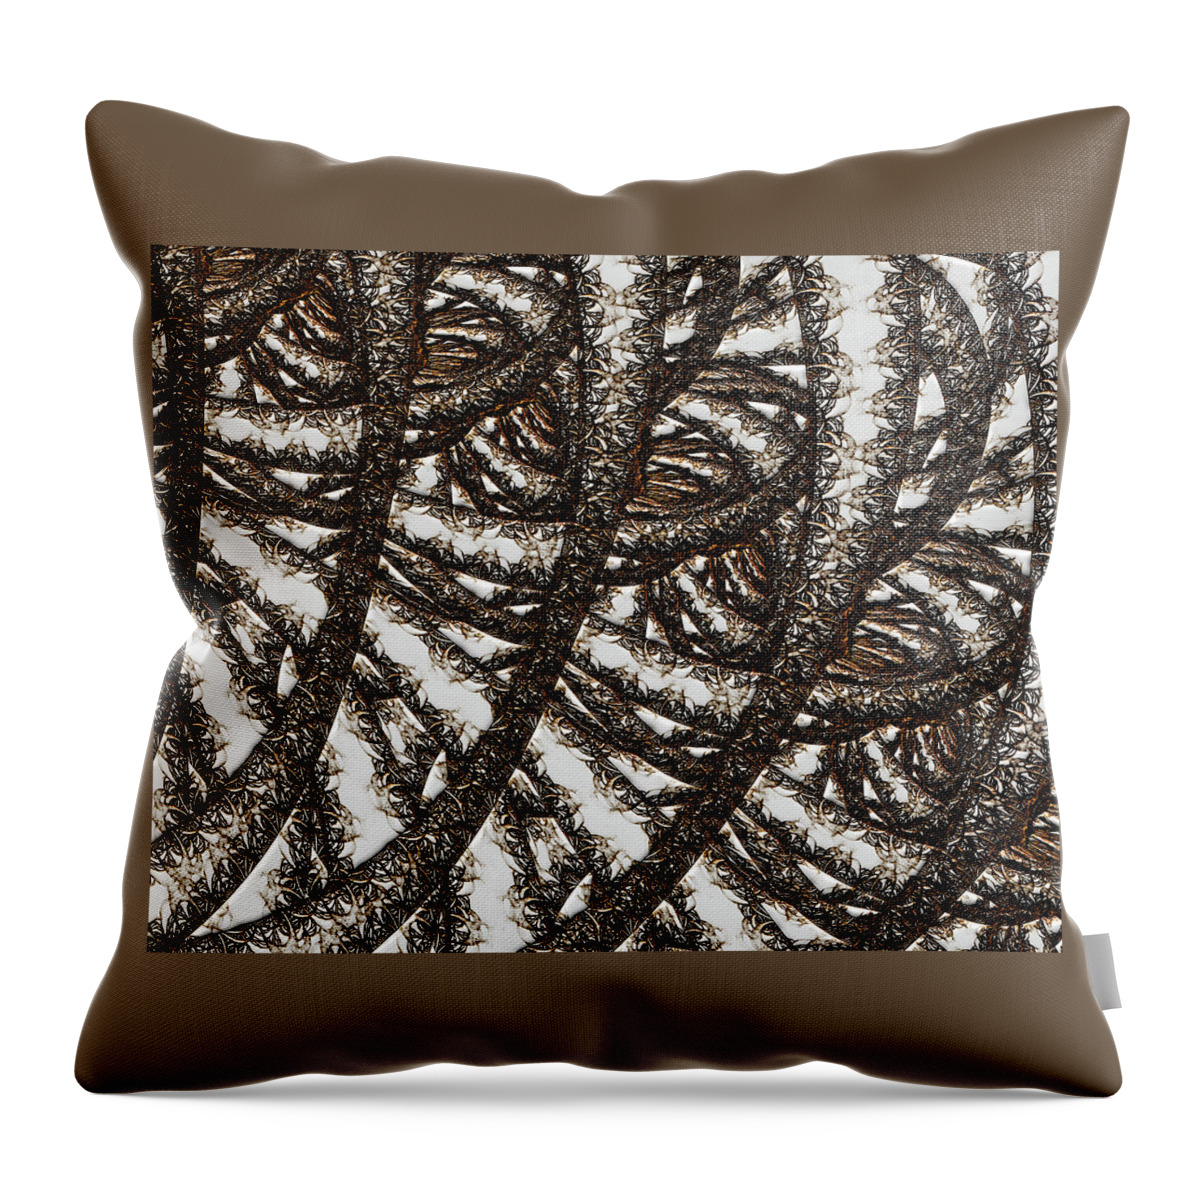 Untangled Throw Pillow featuring the digital art Untangled by Carmen Hathaway